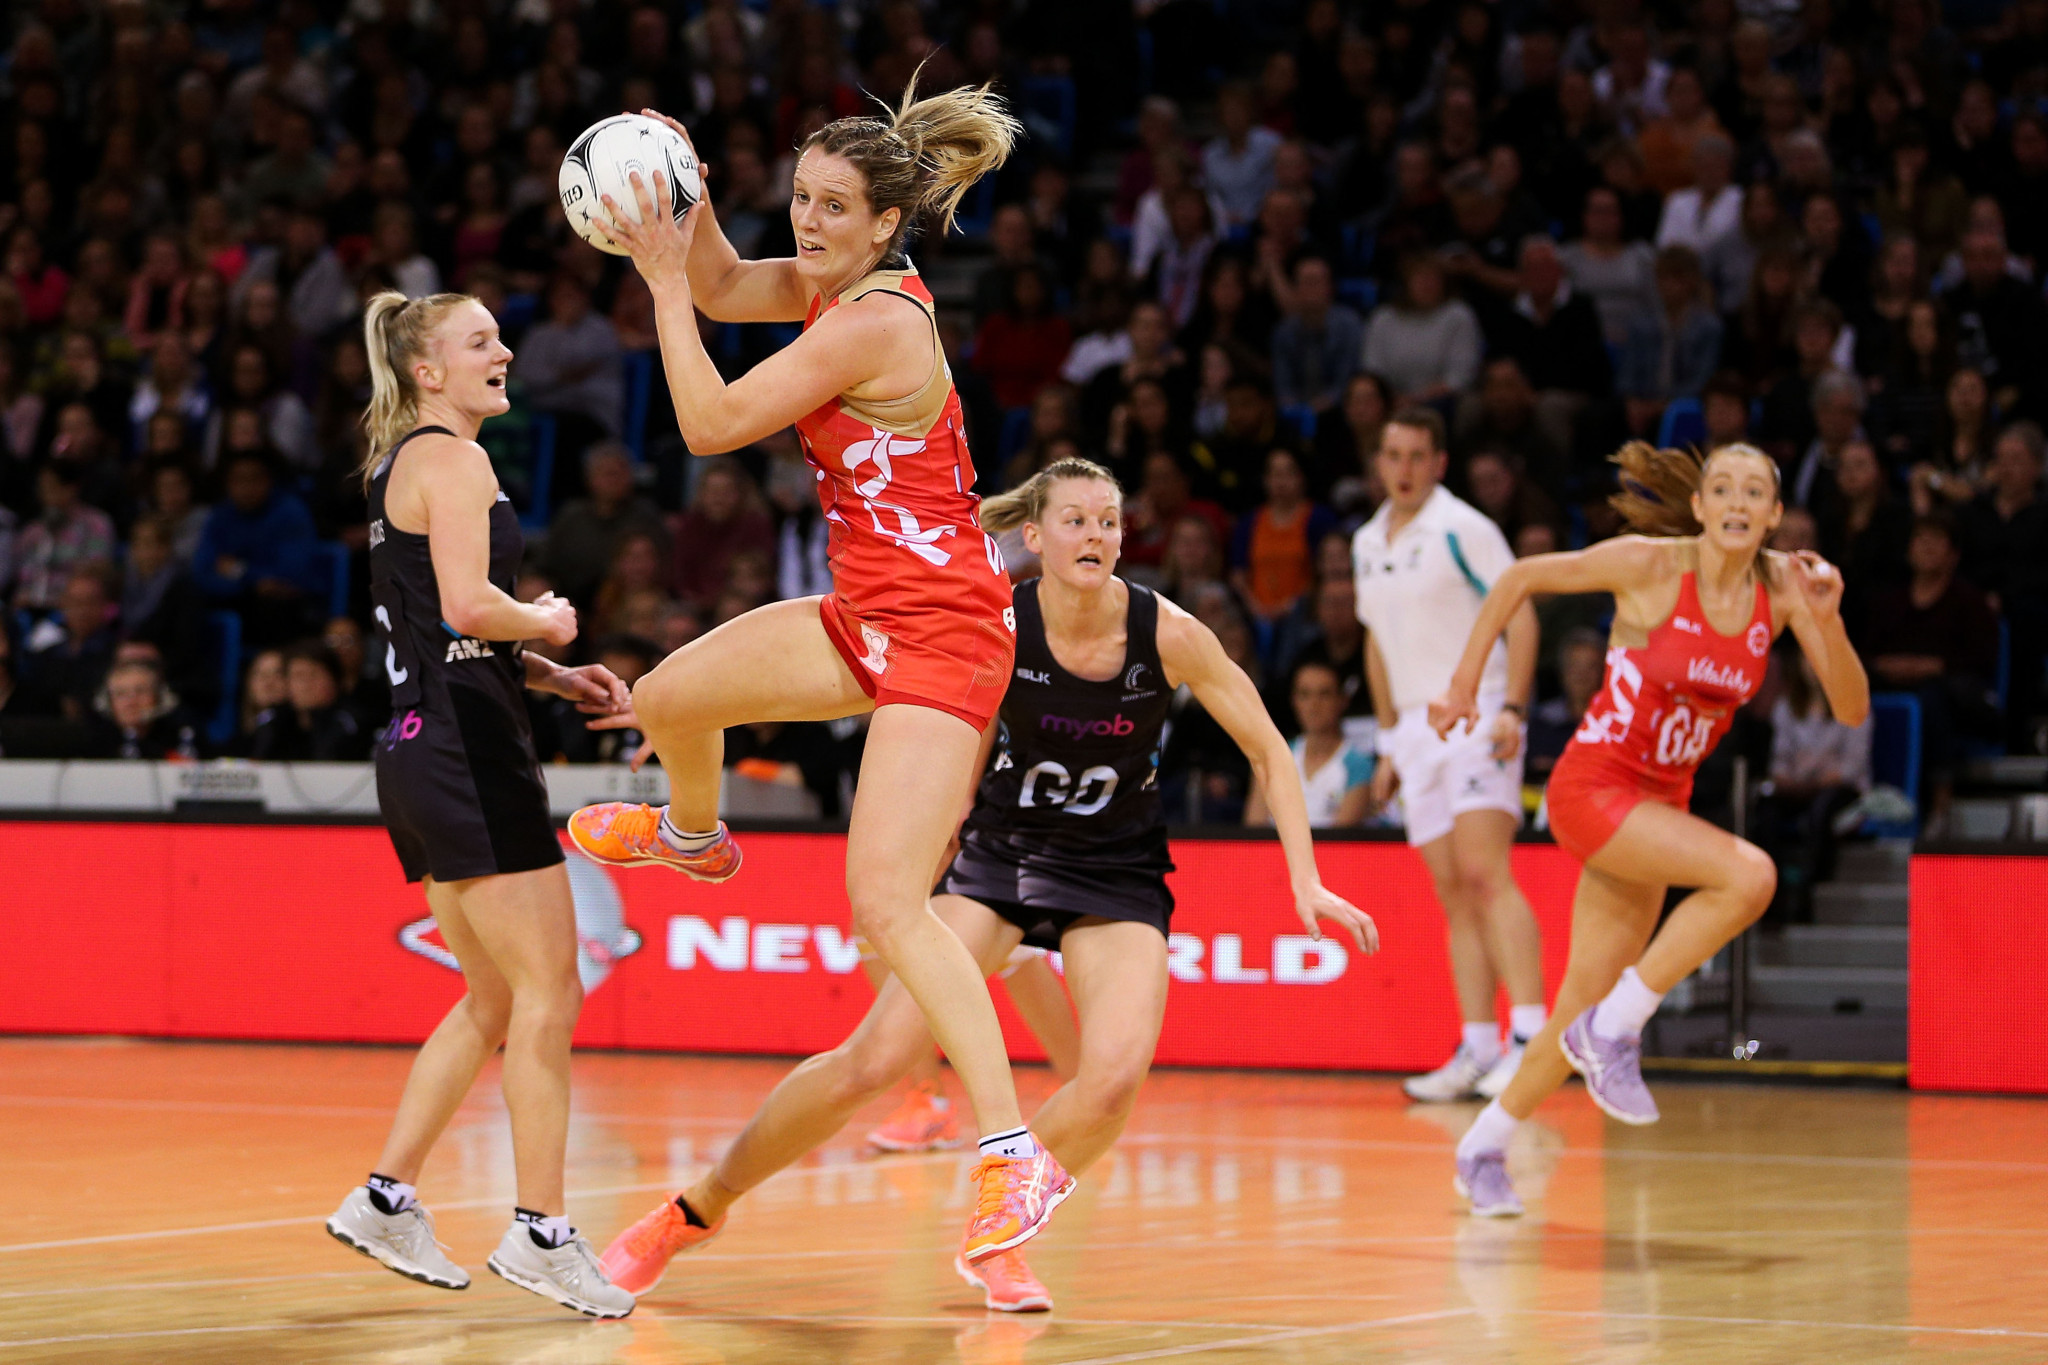 Sara Bayman has described England's netball win in Gold Coast as "pivotal" for the sport ©Getty Images